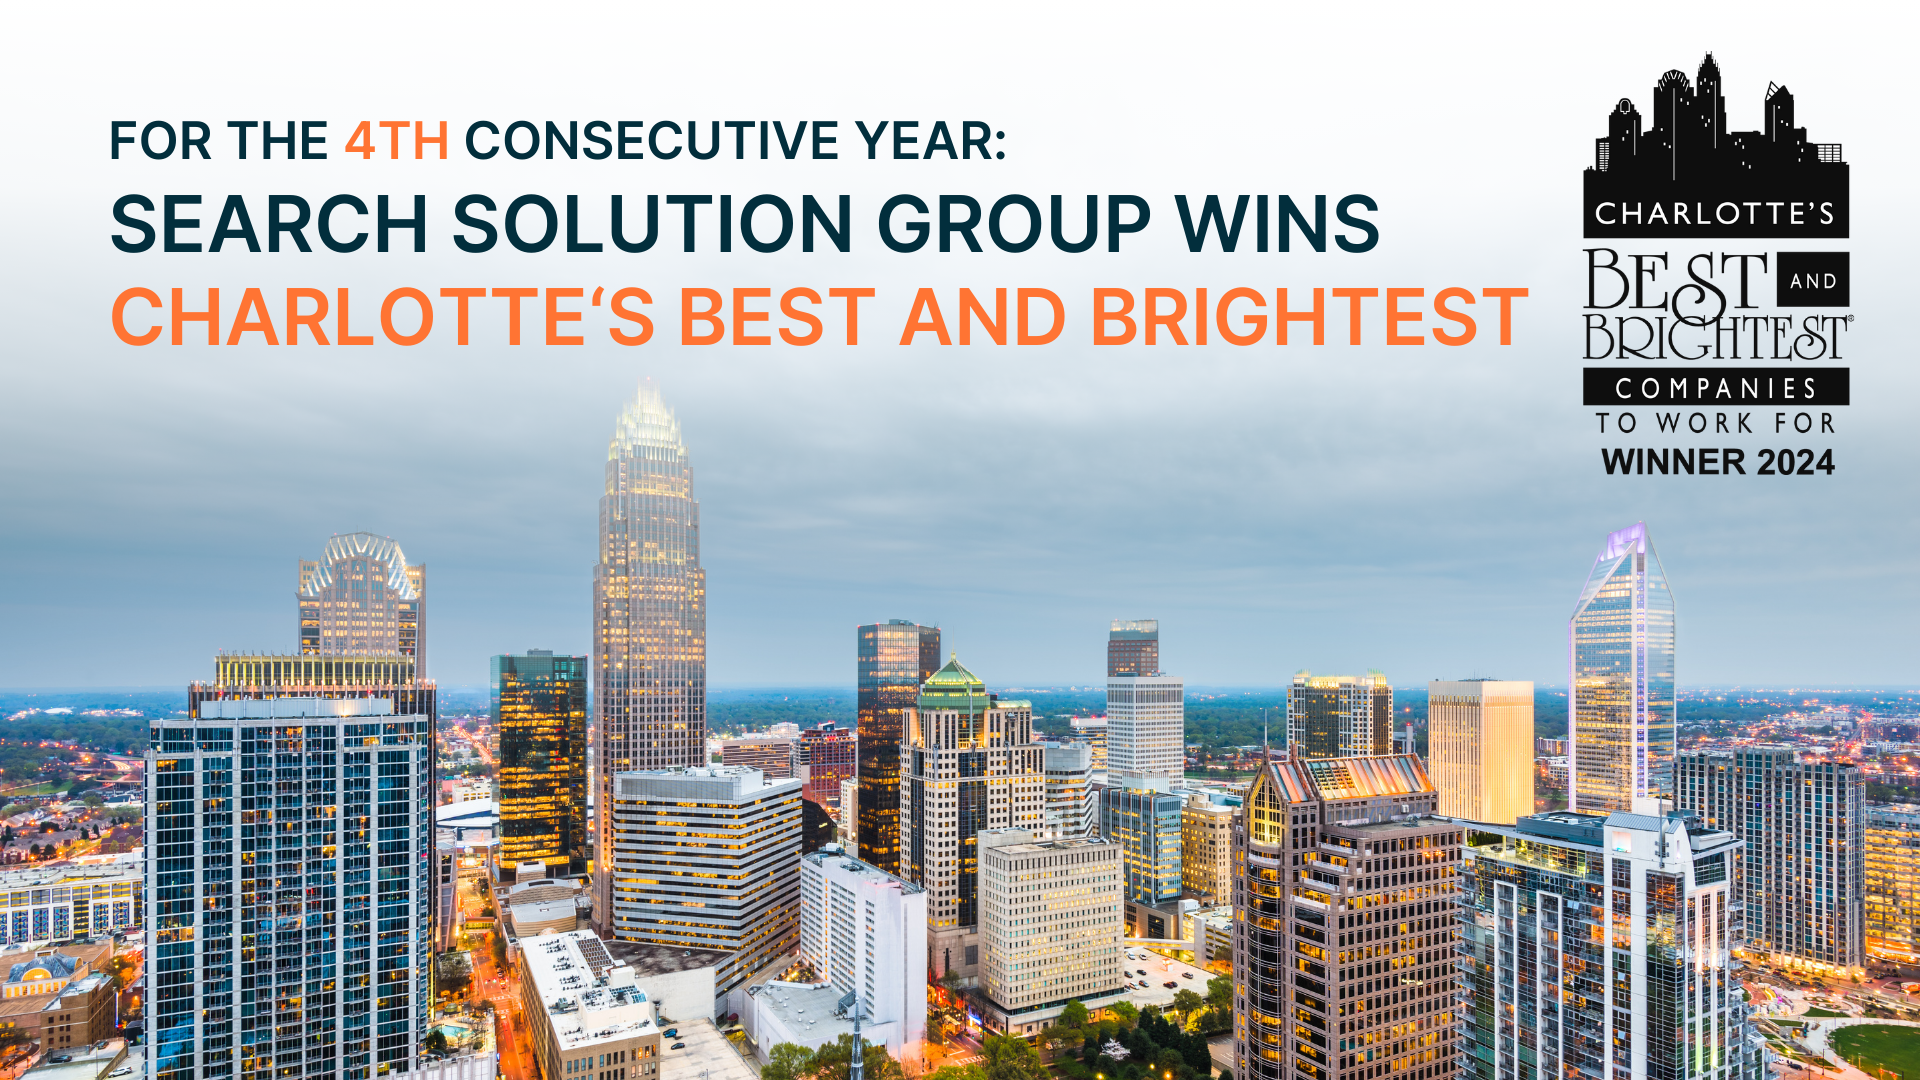 Proud Winner of the Best & Brightest Companies to Work For in Charlotte for the Fourth Consecutive Year